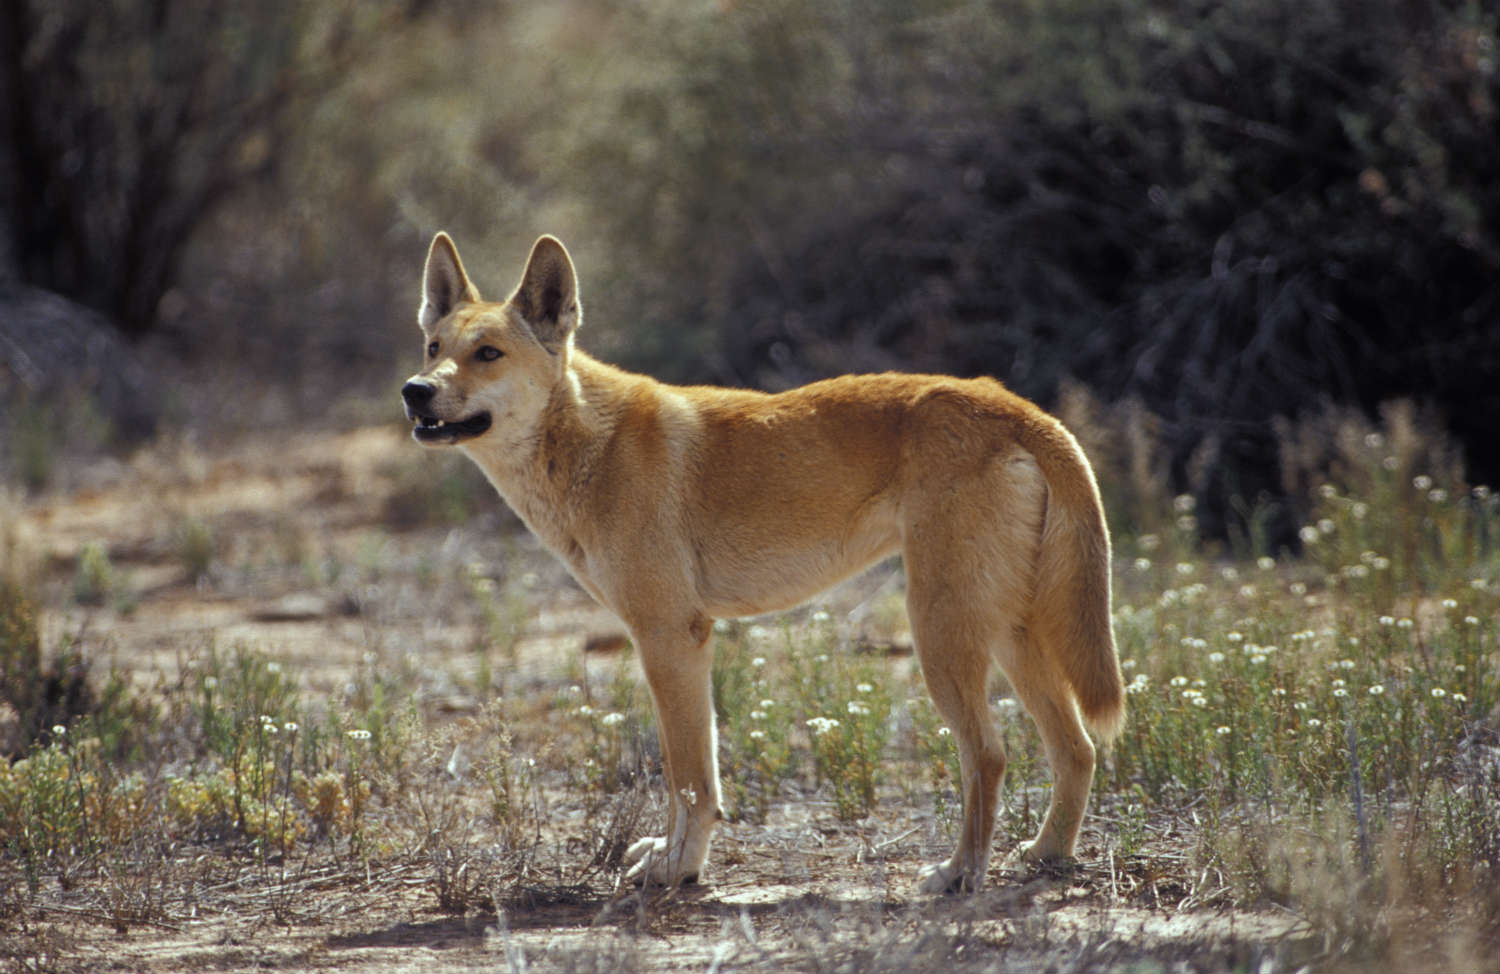 Dingoes are blamed for driving the Tasmanian tiger to extinction